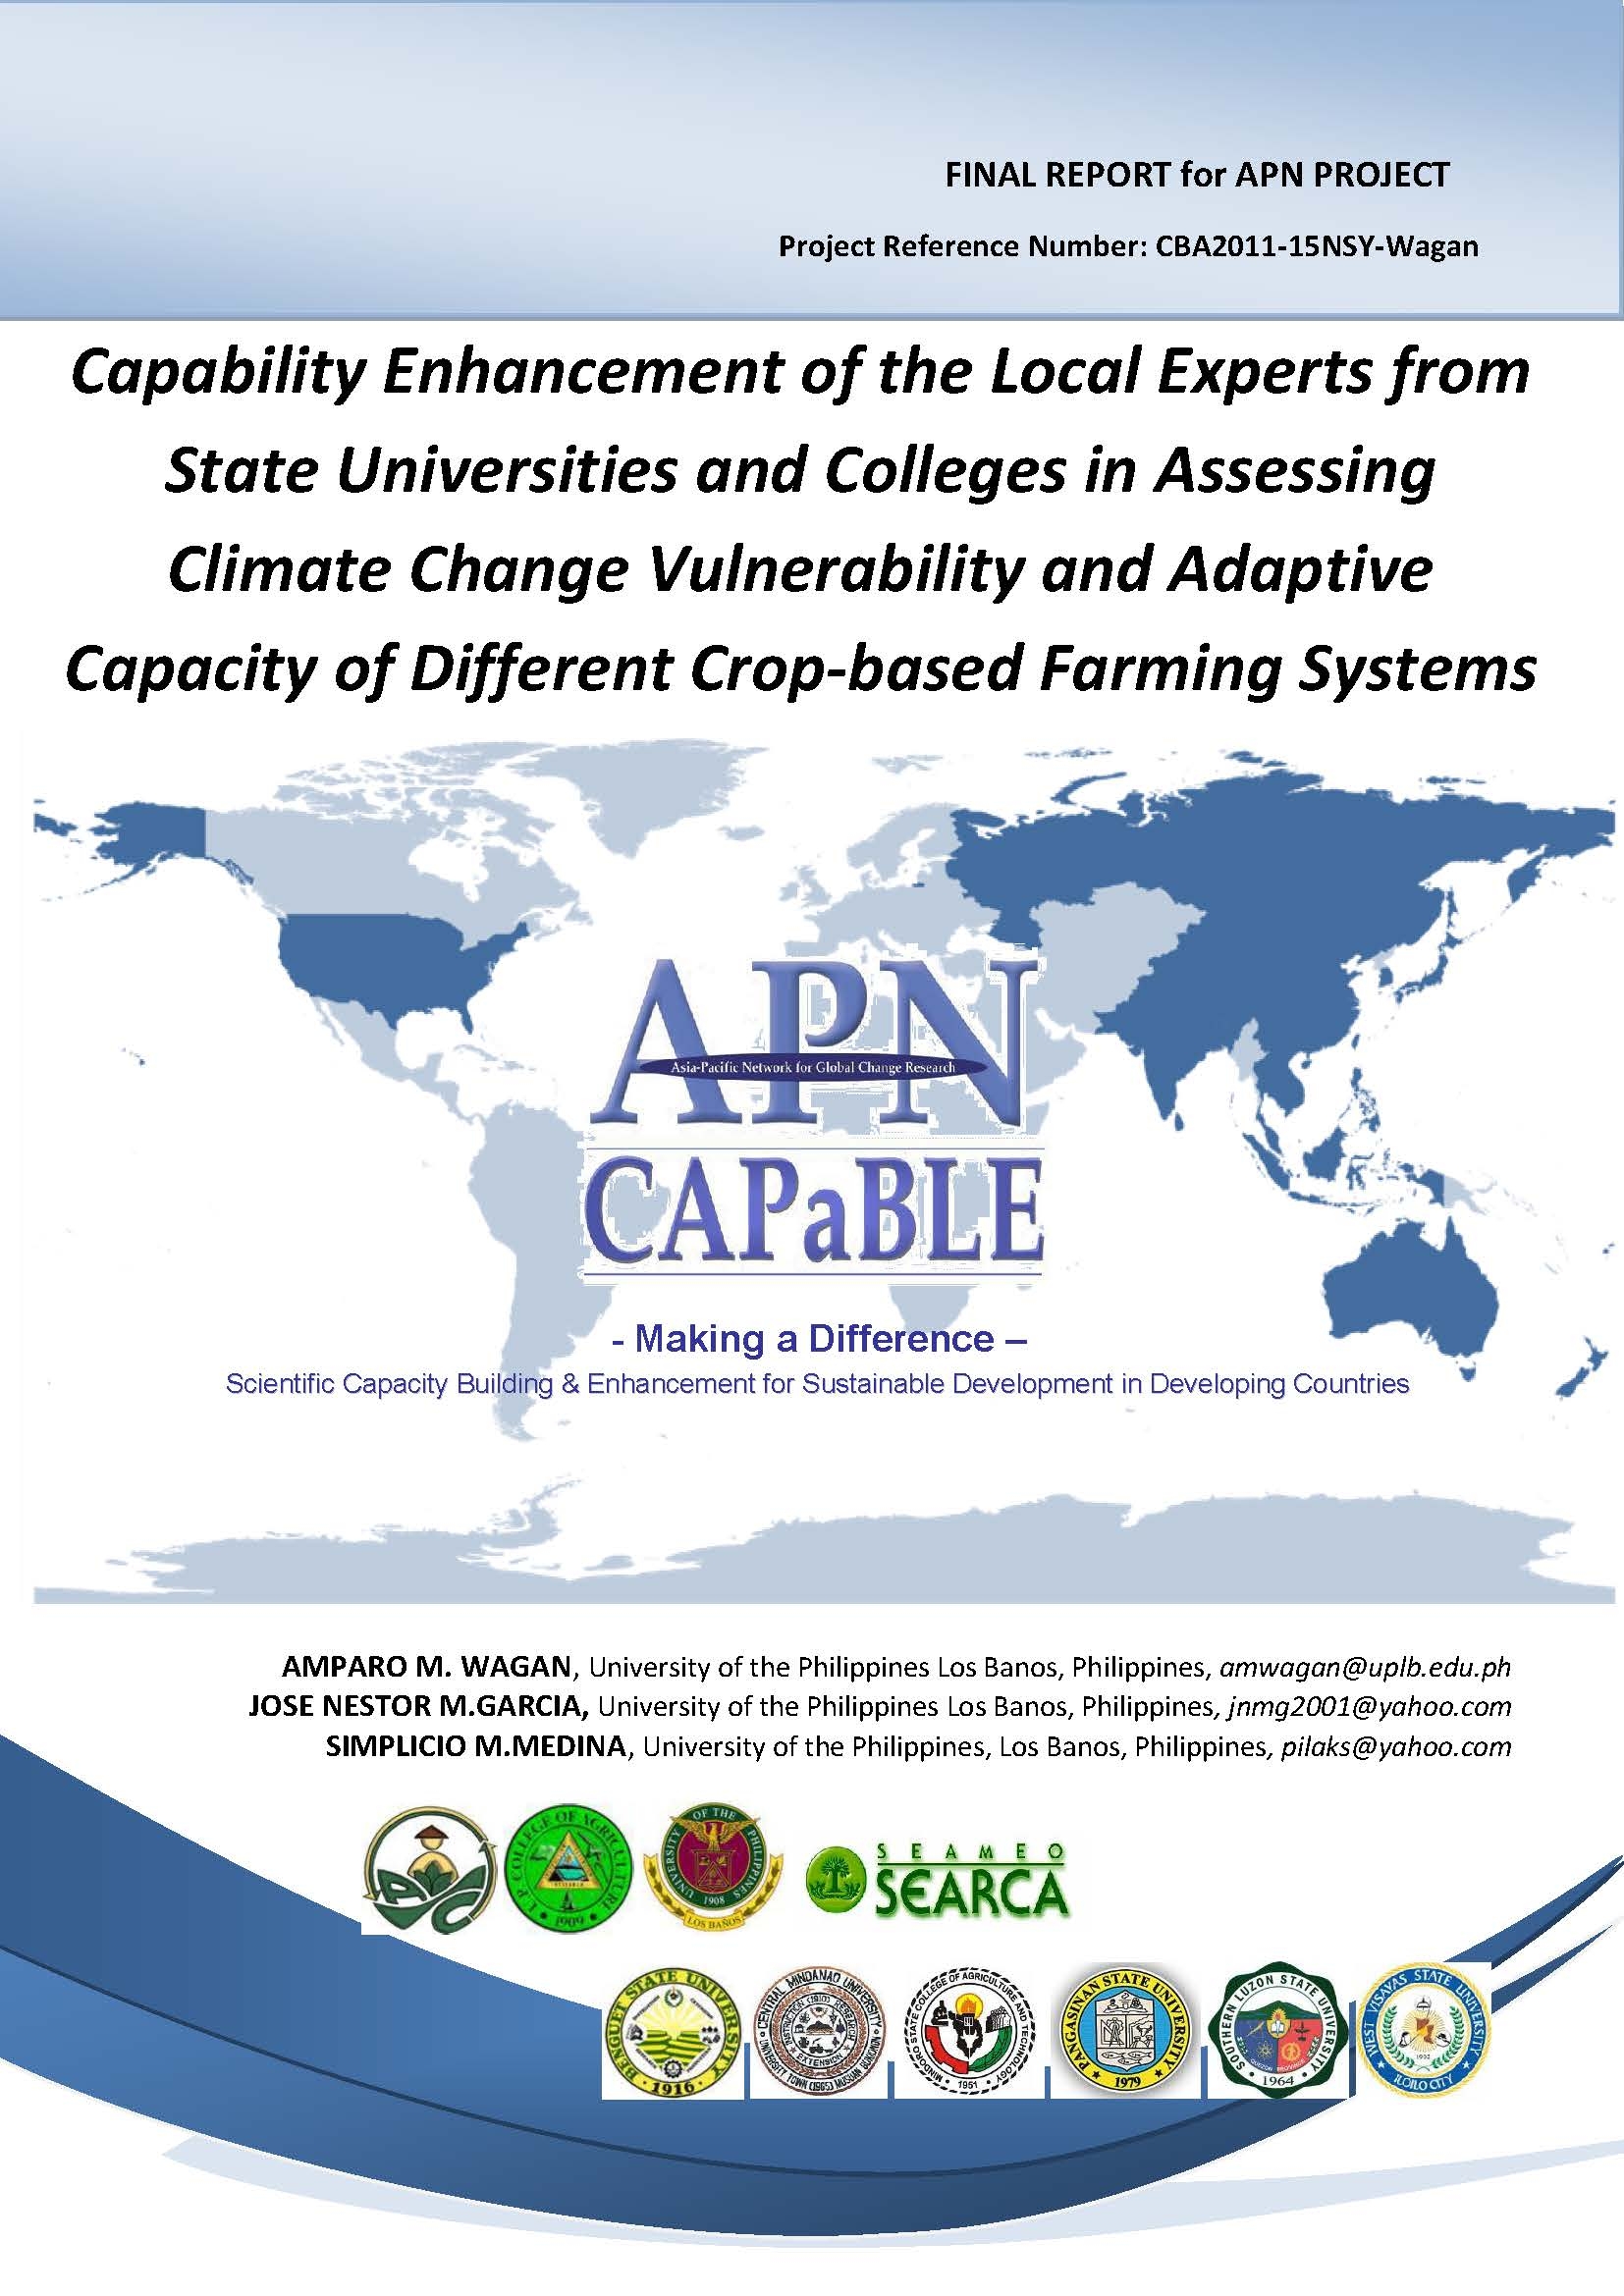 Capability Enhancement of the Local Experts from State Universities and Colleges in Assessing Climate Change Vulnerability and Adaptive Capacity of Different Crop-based Farming Systems